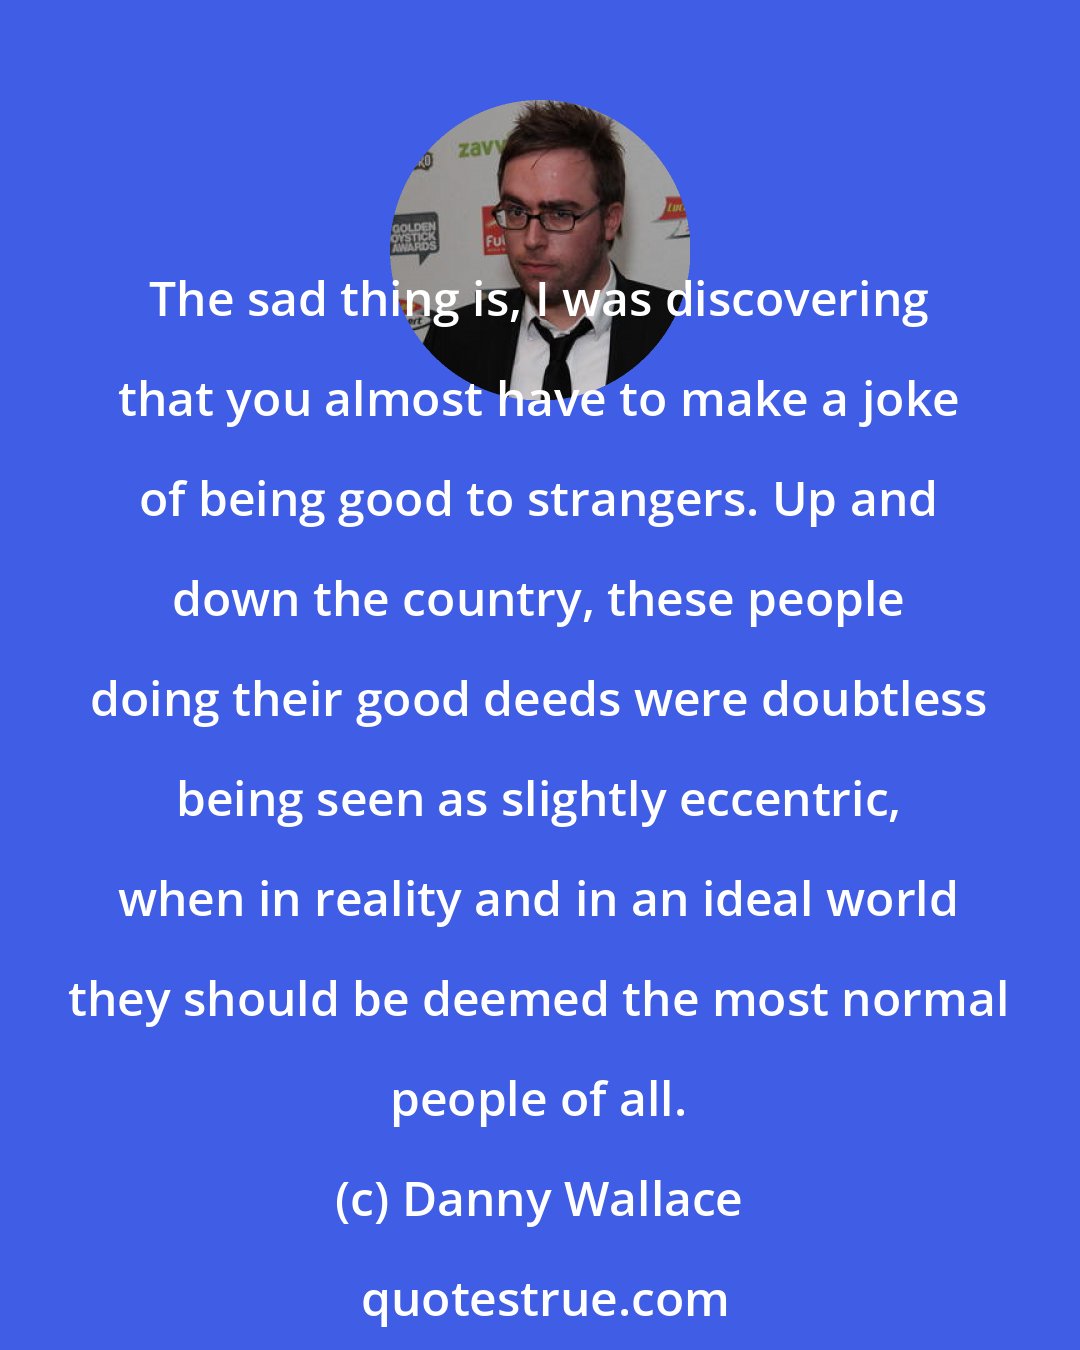 Danny Wallace: The sad thing is, I was discovering that you almost have to make a joke of being good to strangers. Up and down the country, these people doing their good deeds were doubtless being seen as slightly eccentric, when in reality and in an ideal world they should be deemed the most normal people of all.